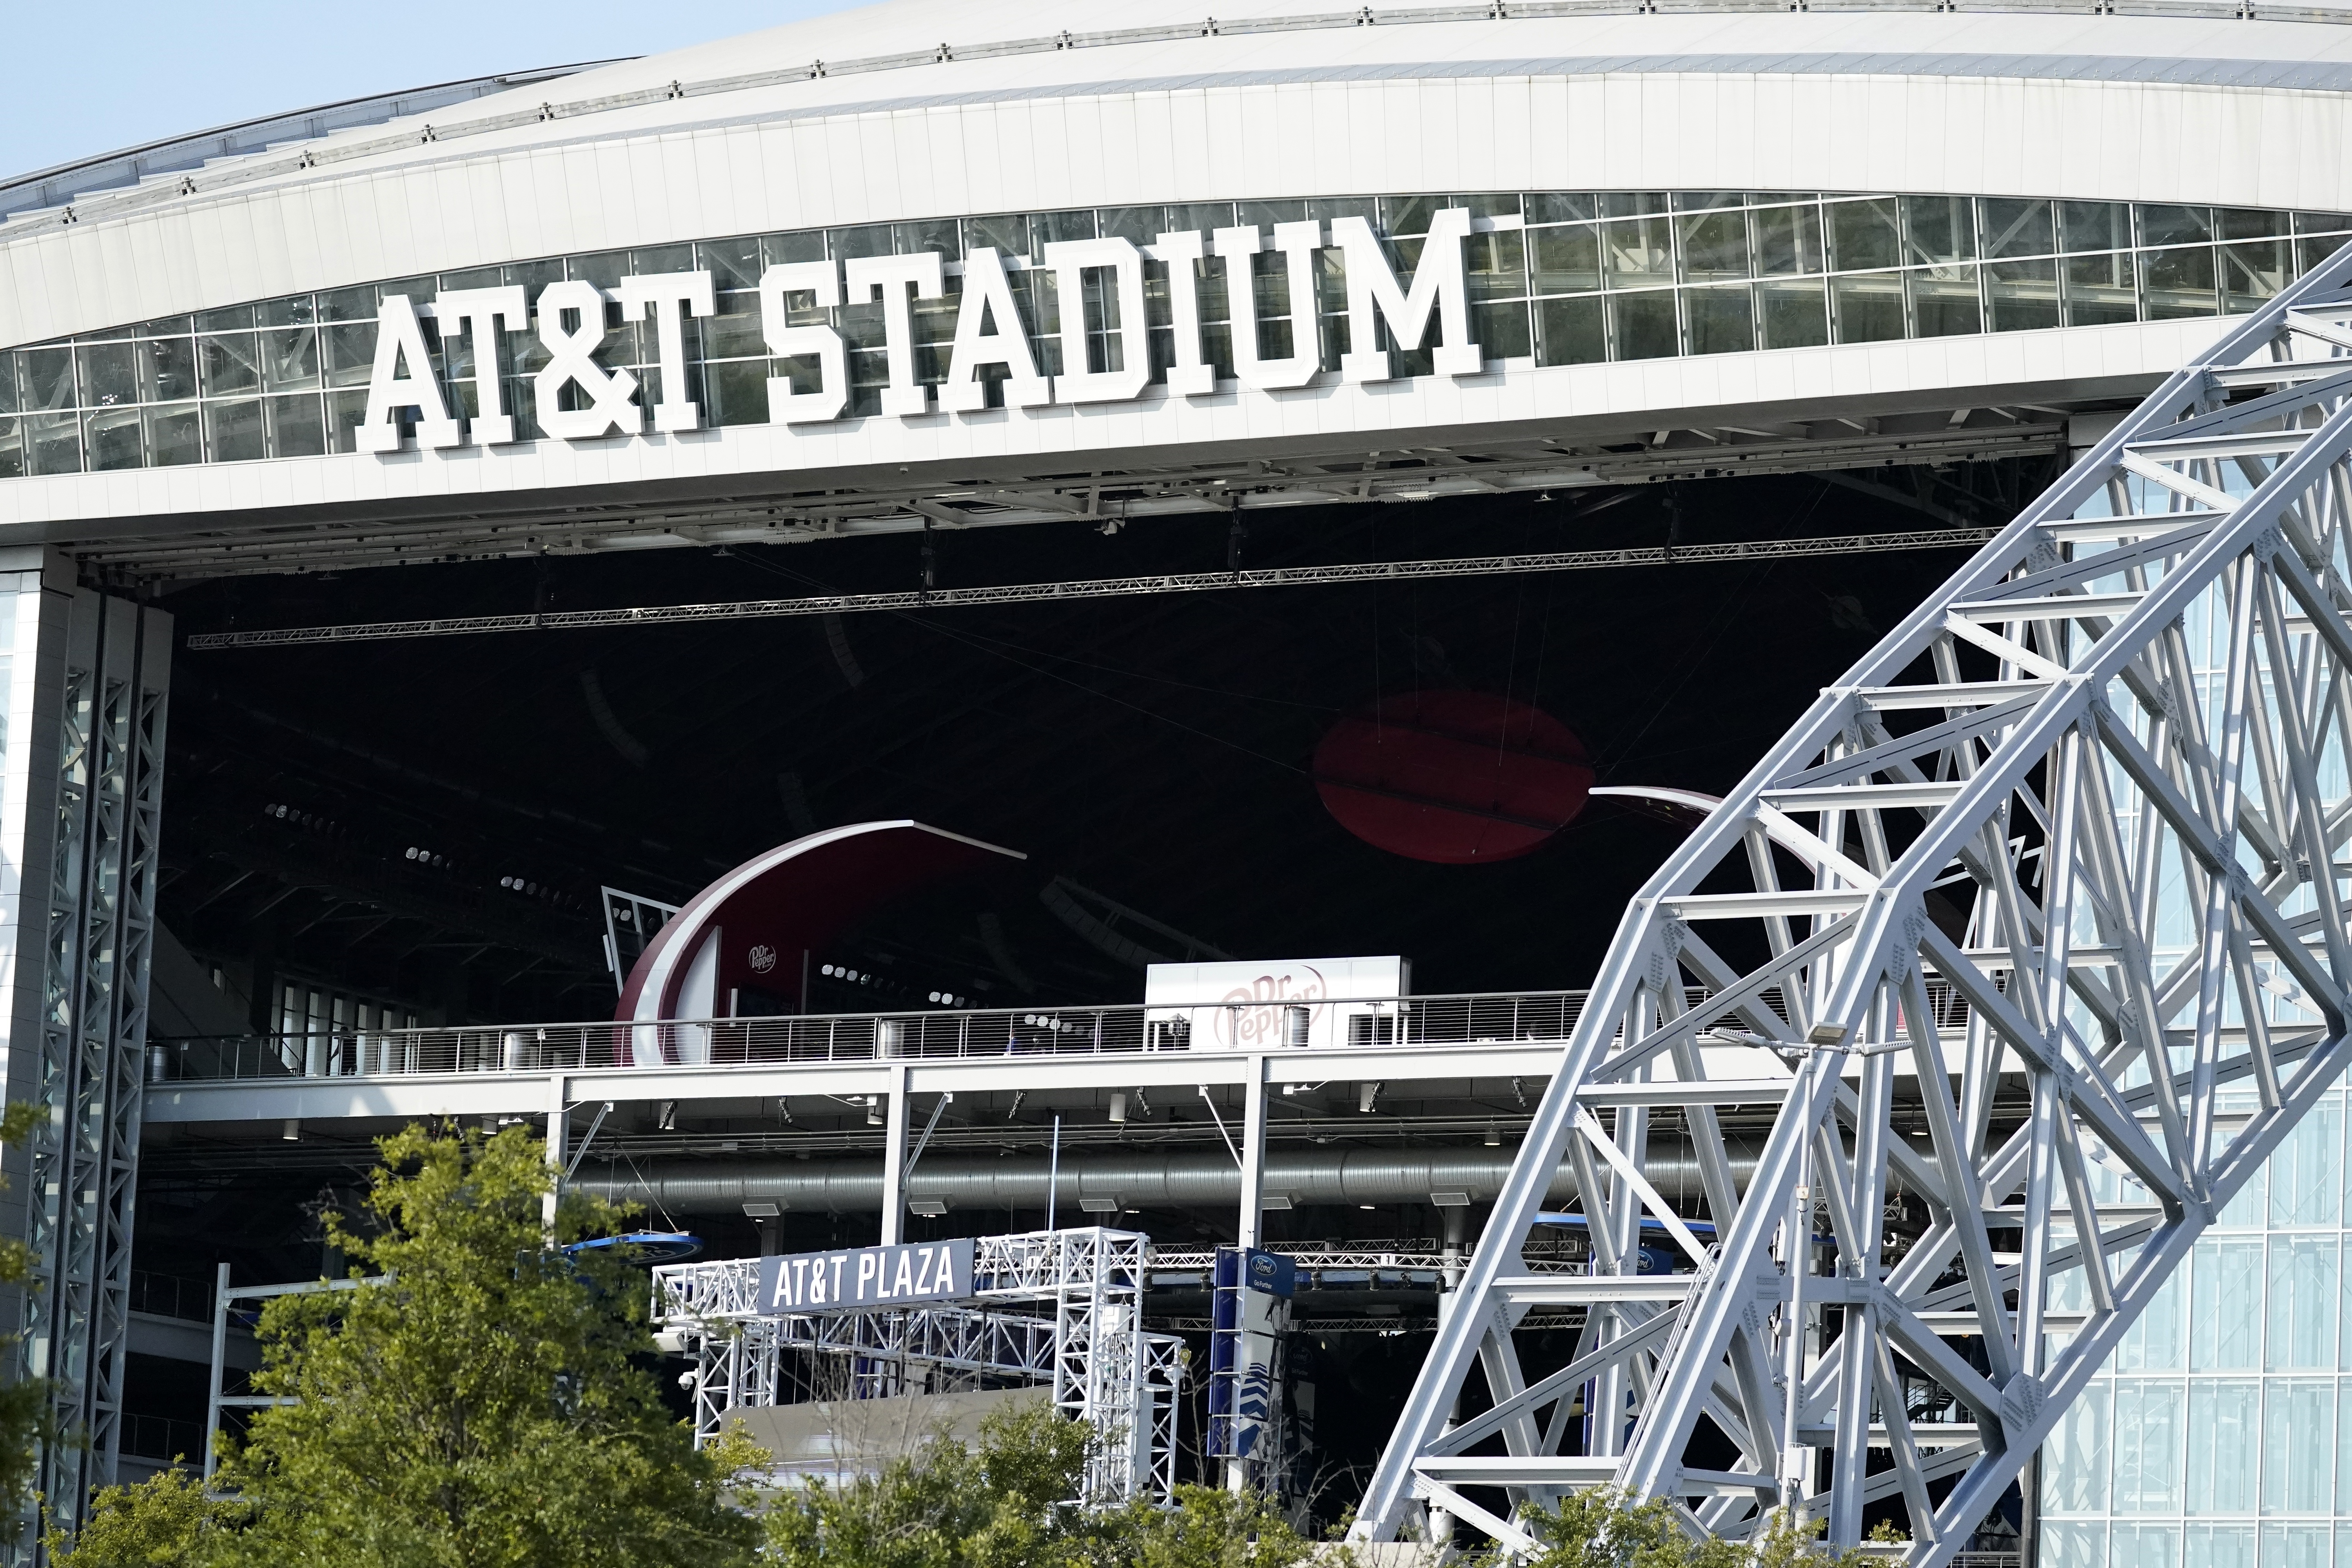 AT&T Stadium - "Jerry's World" - is a sight to behold, but there are better NFL trips to make than Dallas.